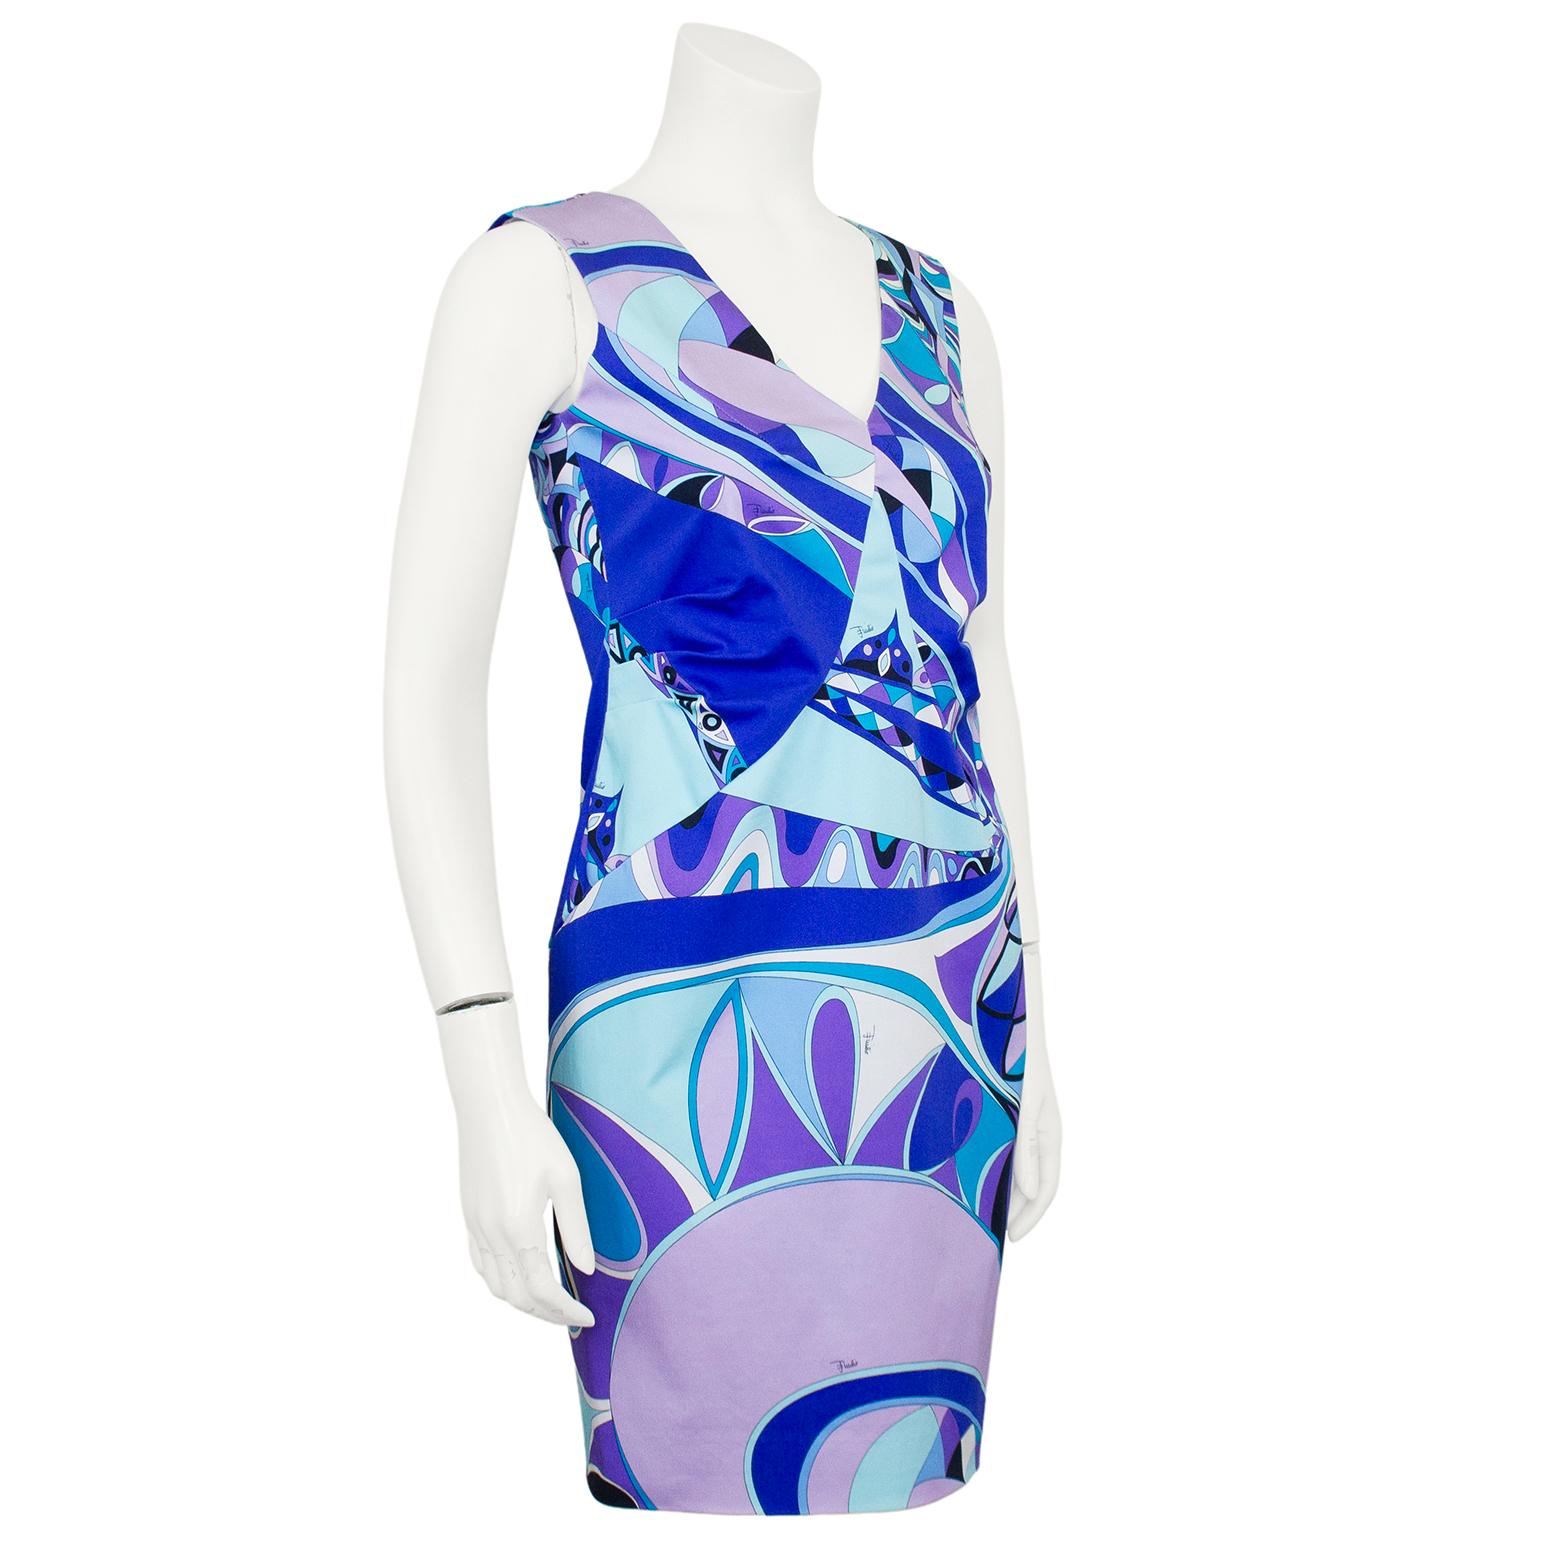 Visual and vibrant Emilio Pucci dress from the early 2000. Allover geometric printed cotton in shades of turquoise, blue and purple with accents of black and white. Sleeveless with v neckline and some pleating through the waist. The cotton has a